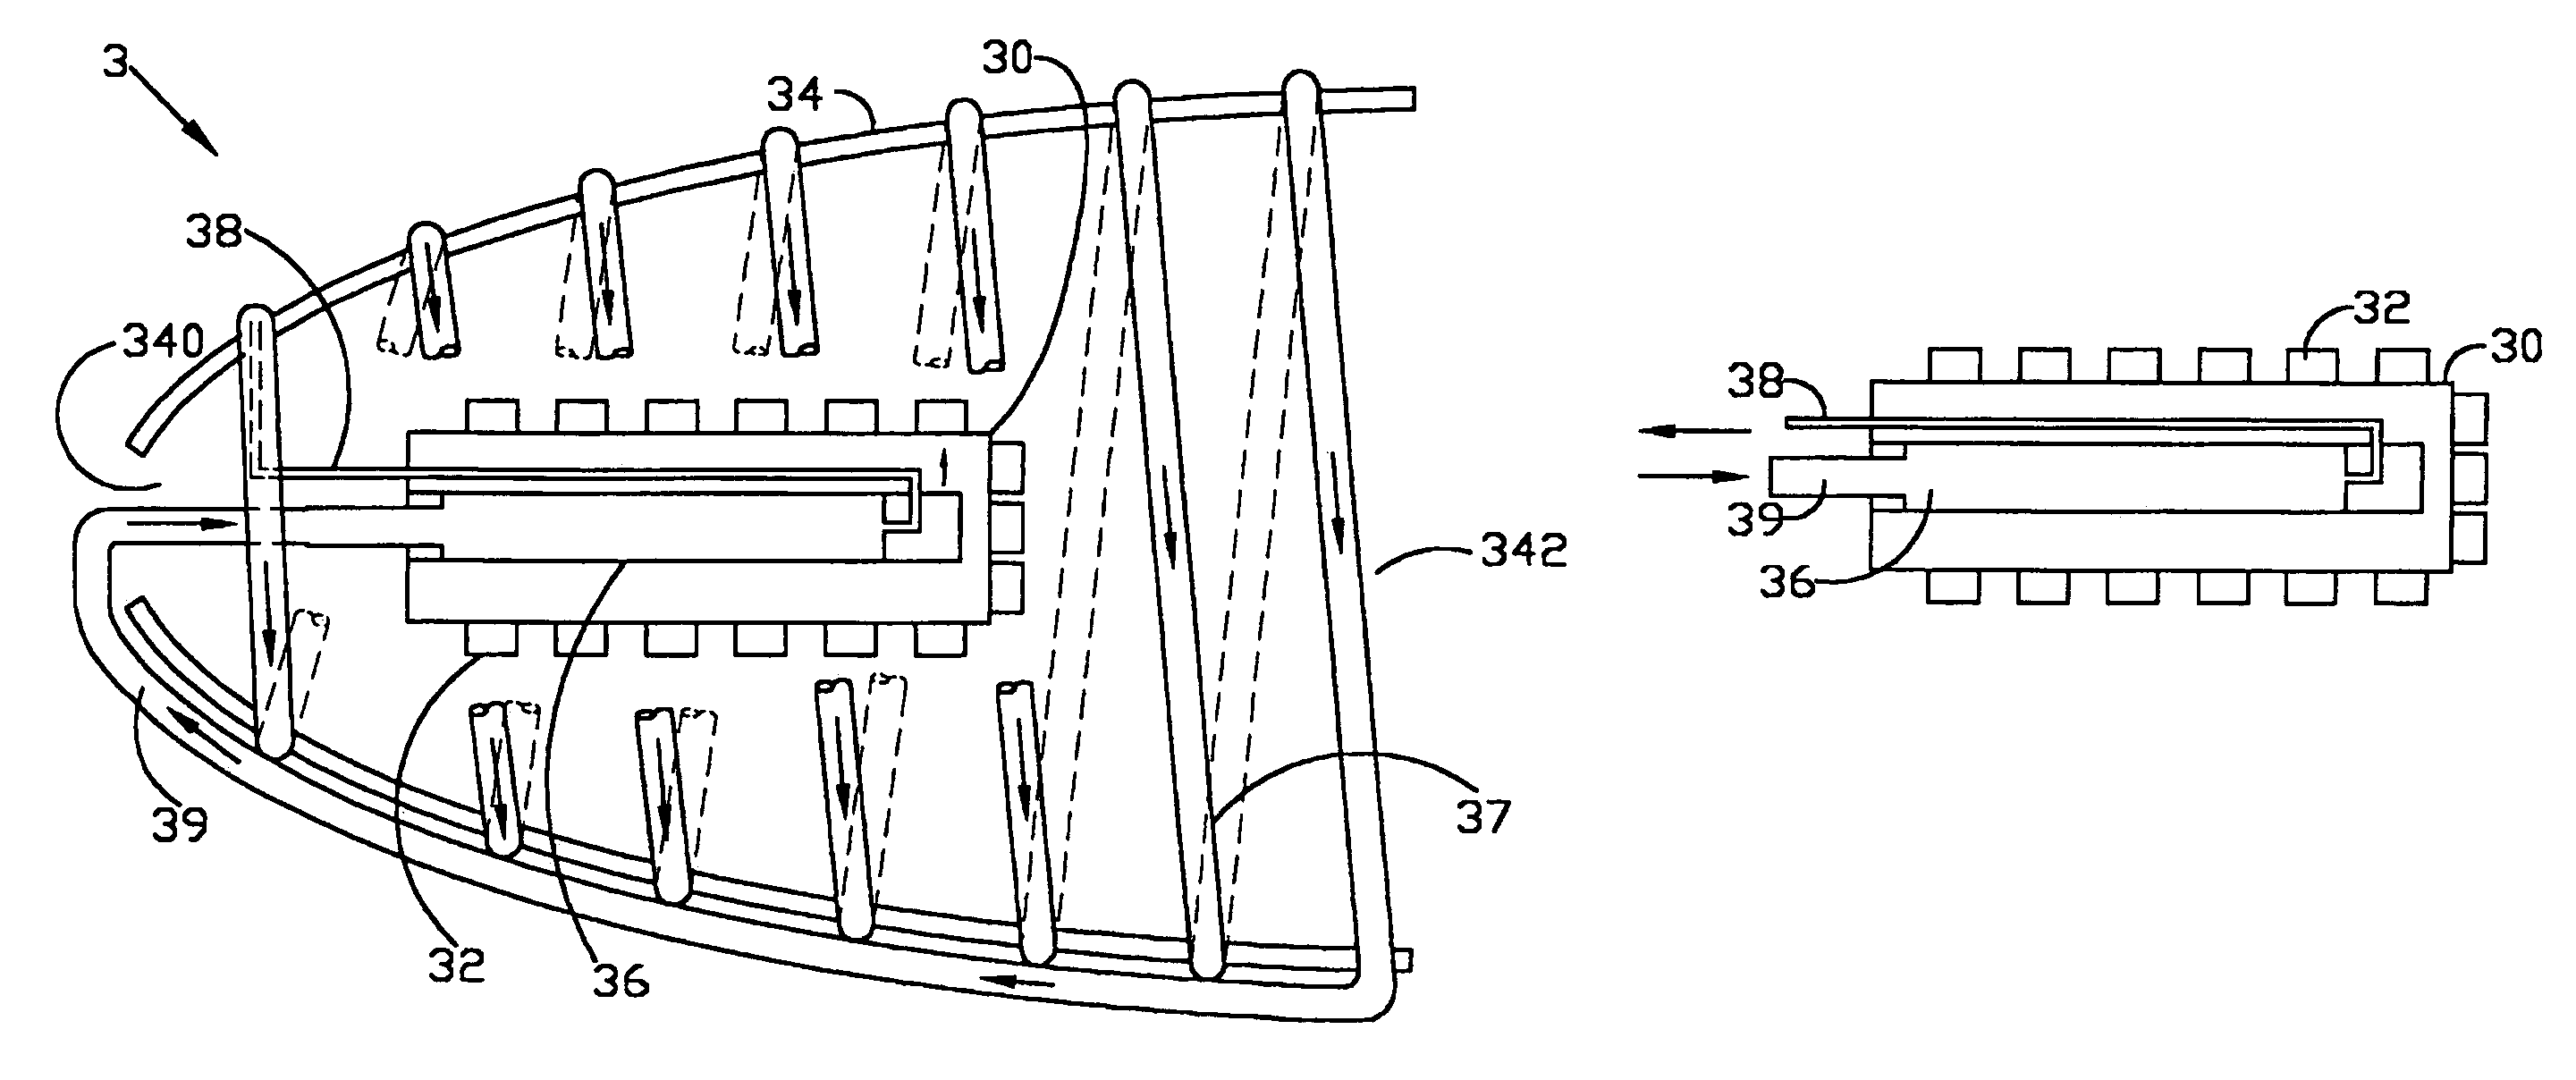 Illumination apparatus of light emitting diodes and method of heat dissipation thereof